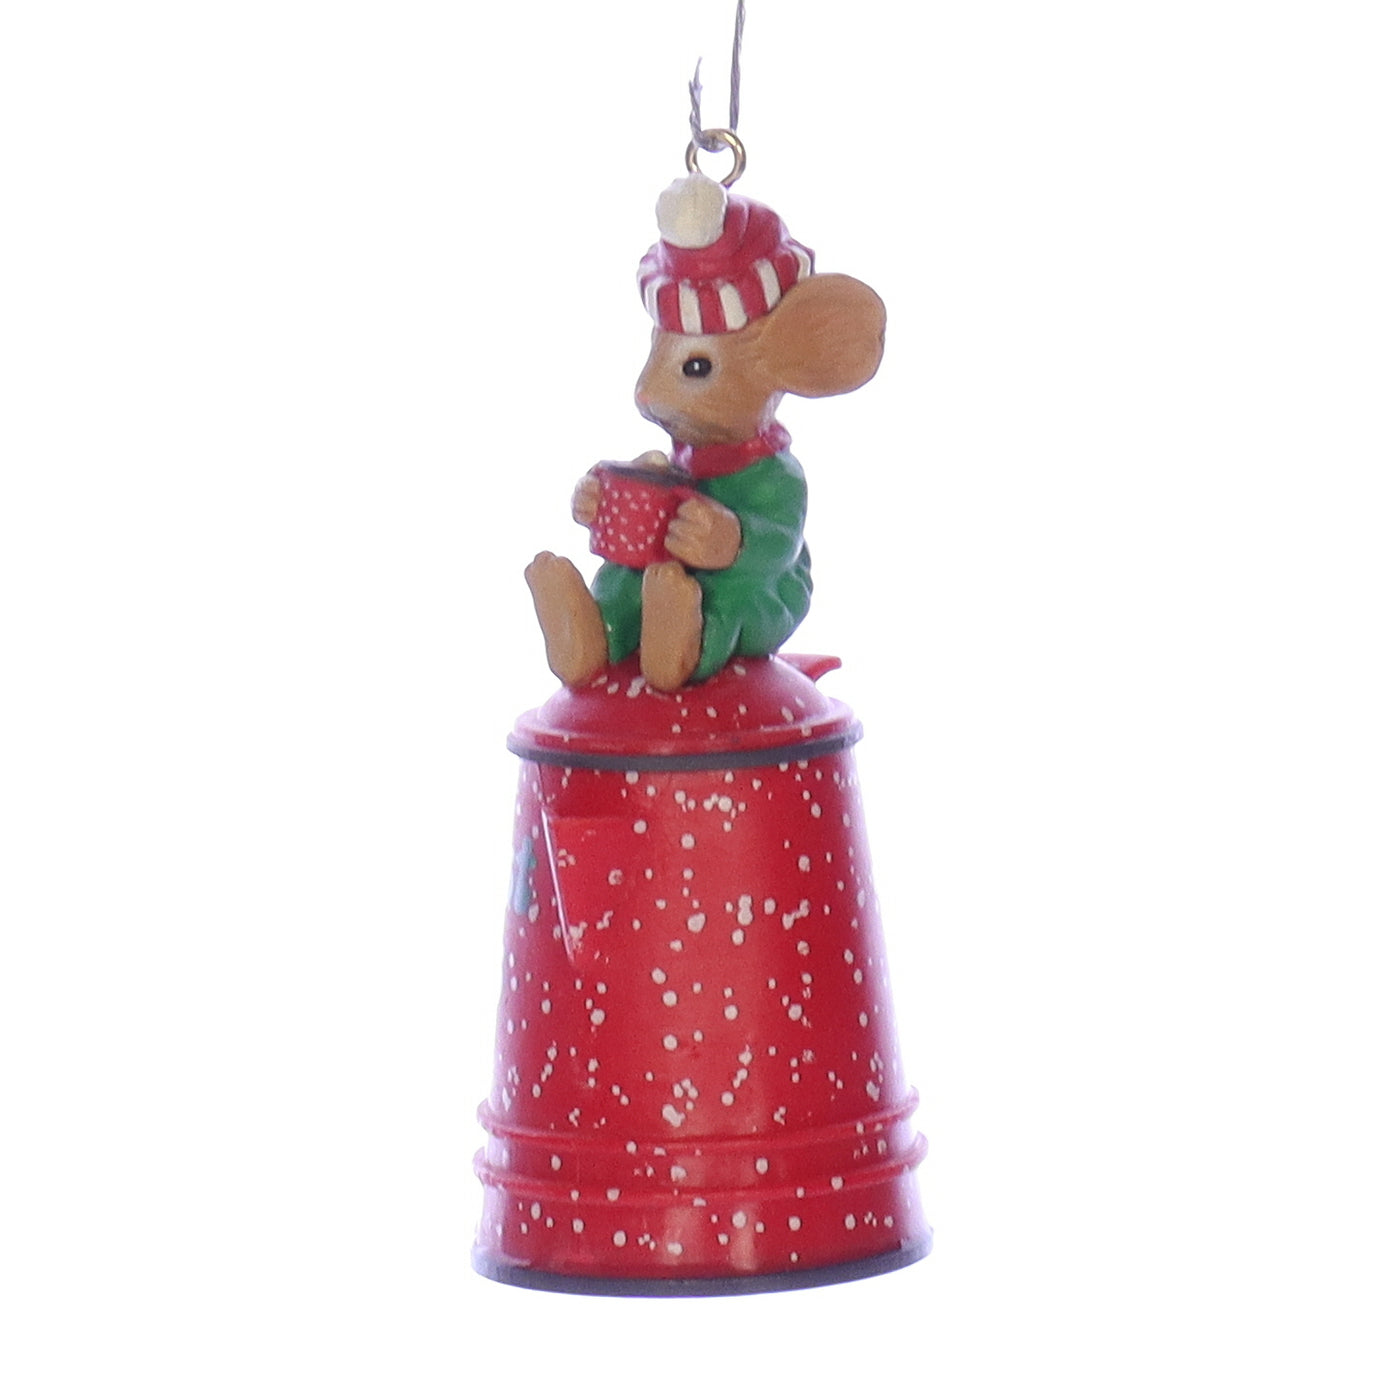 Enesco_Treasury_of_Christmas_Ornaments_564974_Brewing_Warm_Wishes_Mouse_Ornament_1991 Front Left View